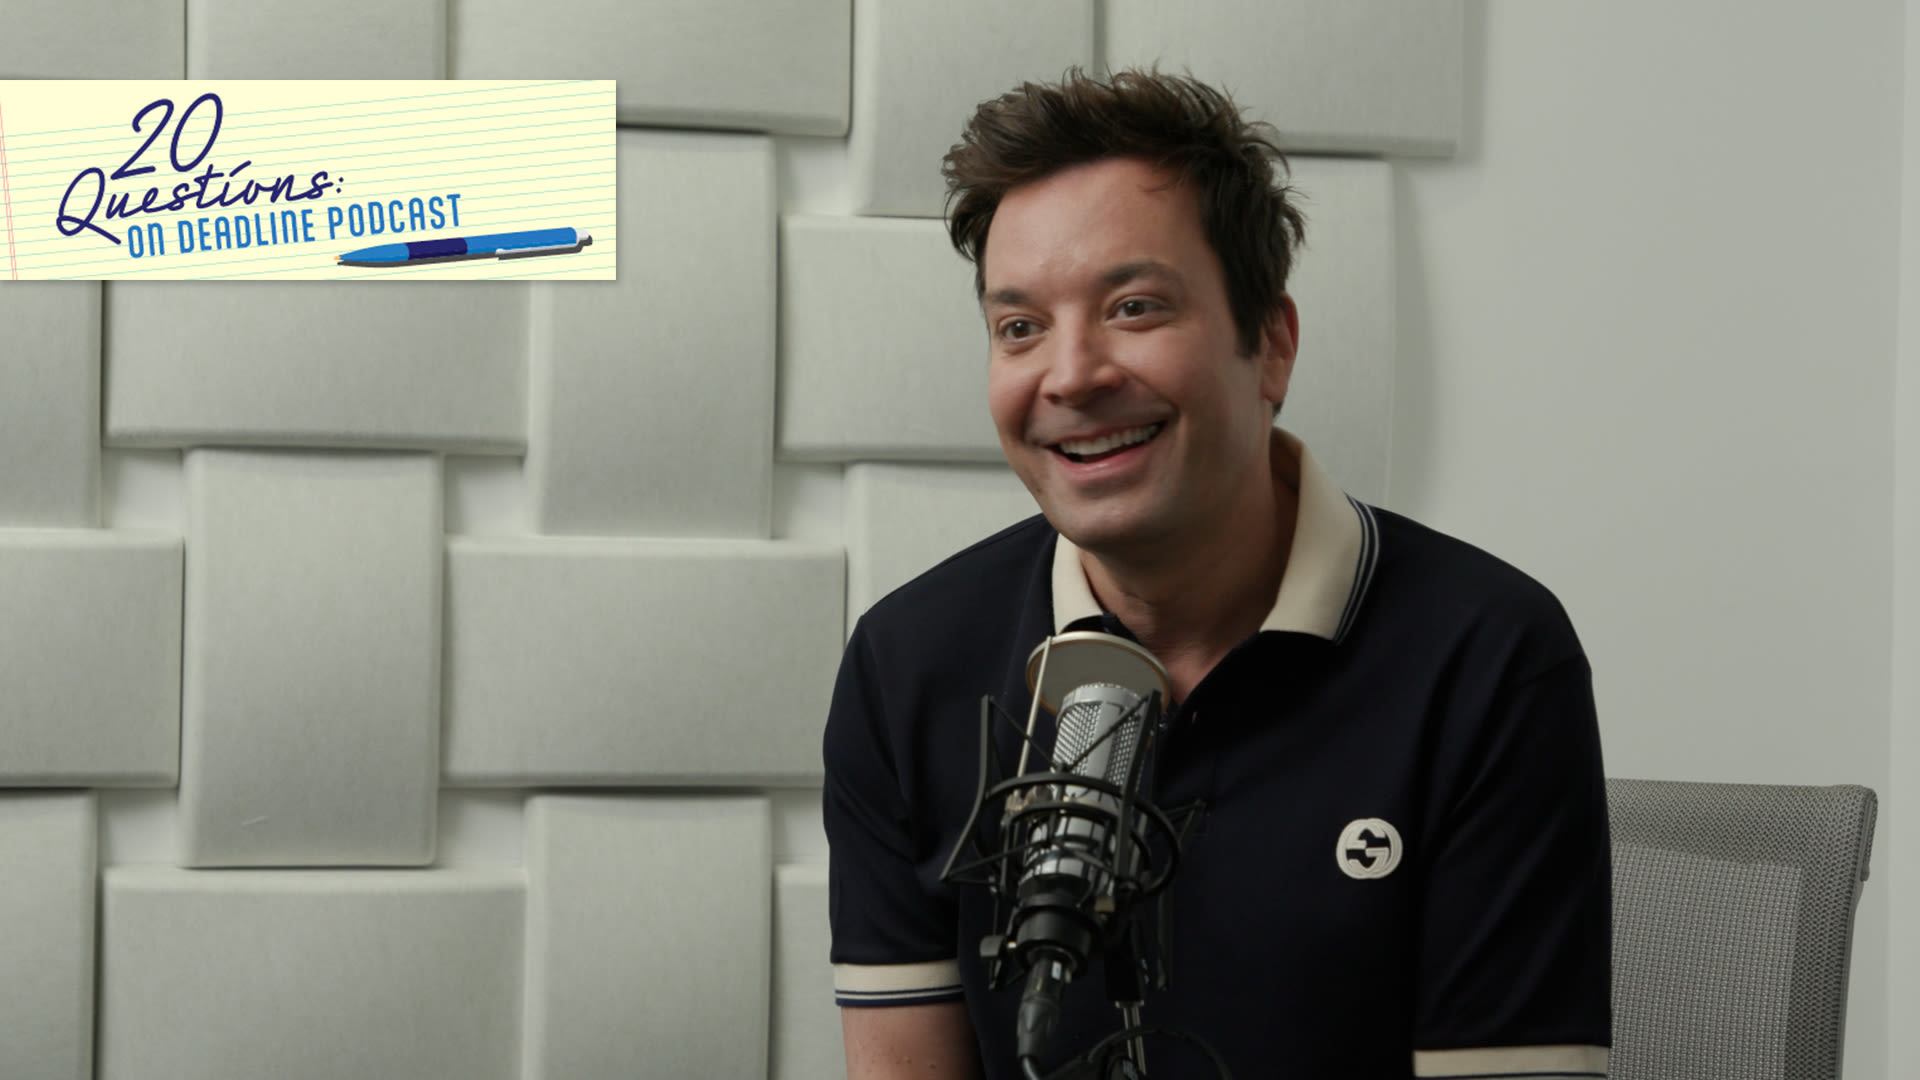 ...Questions On Deadline Podcast: Jimmy Fallon Celebrates 10 Years Of ‘The...Nicole Kidman & Ping Pong With Prince